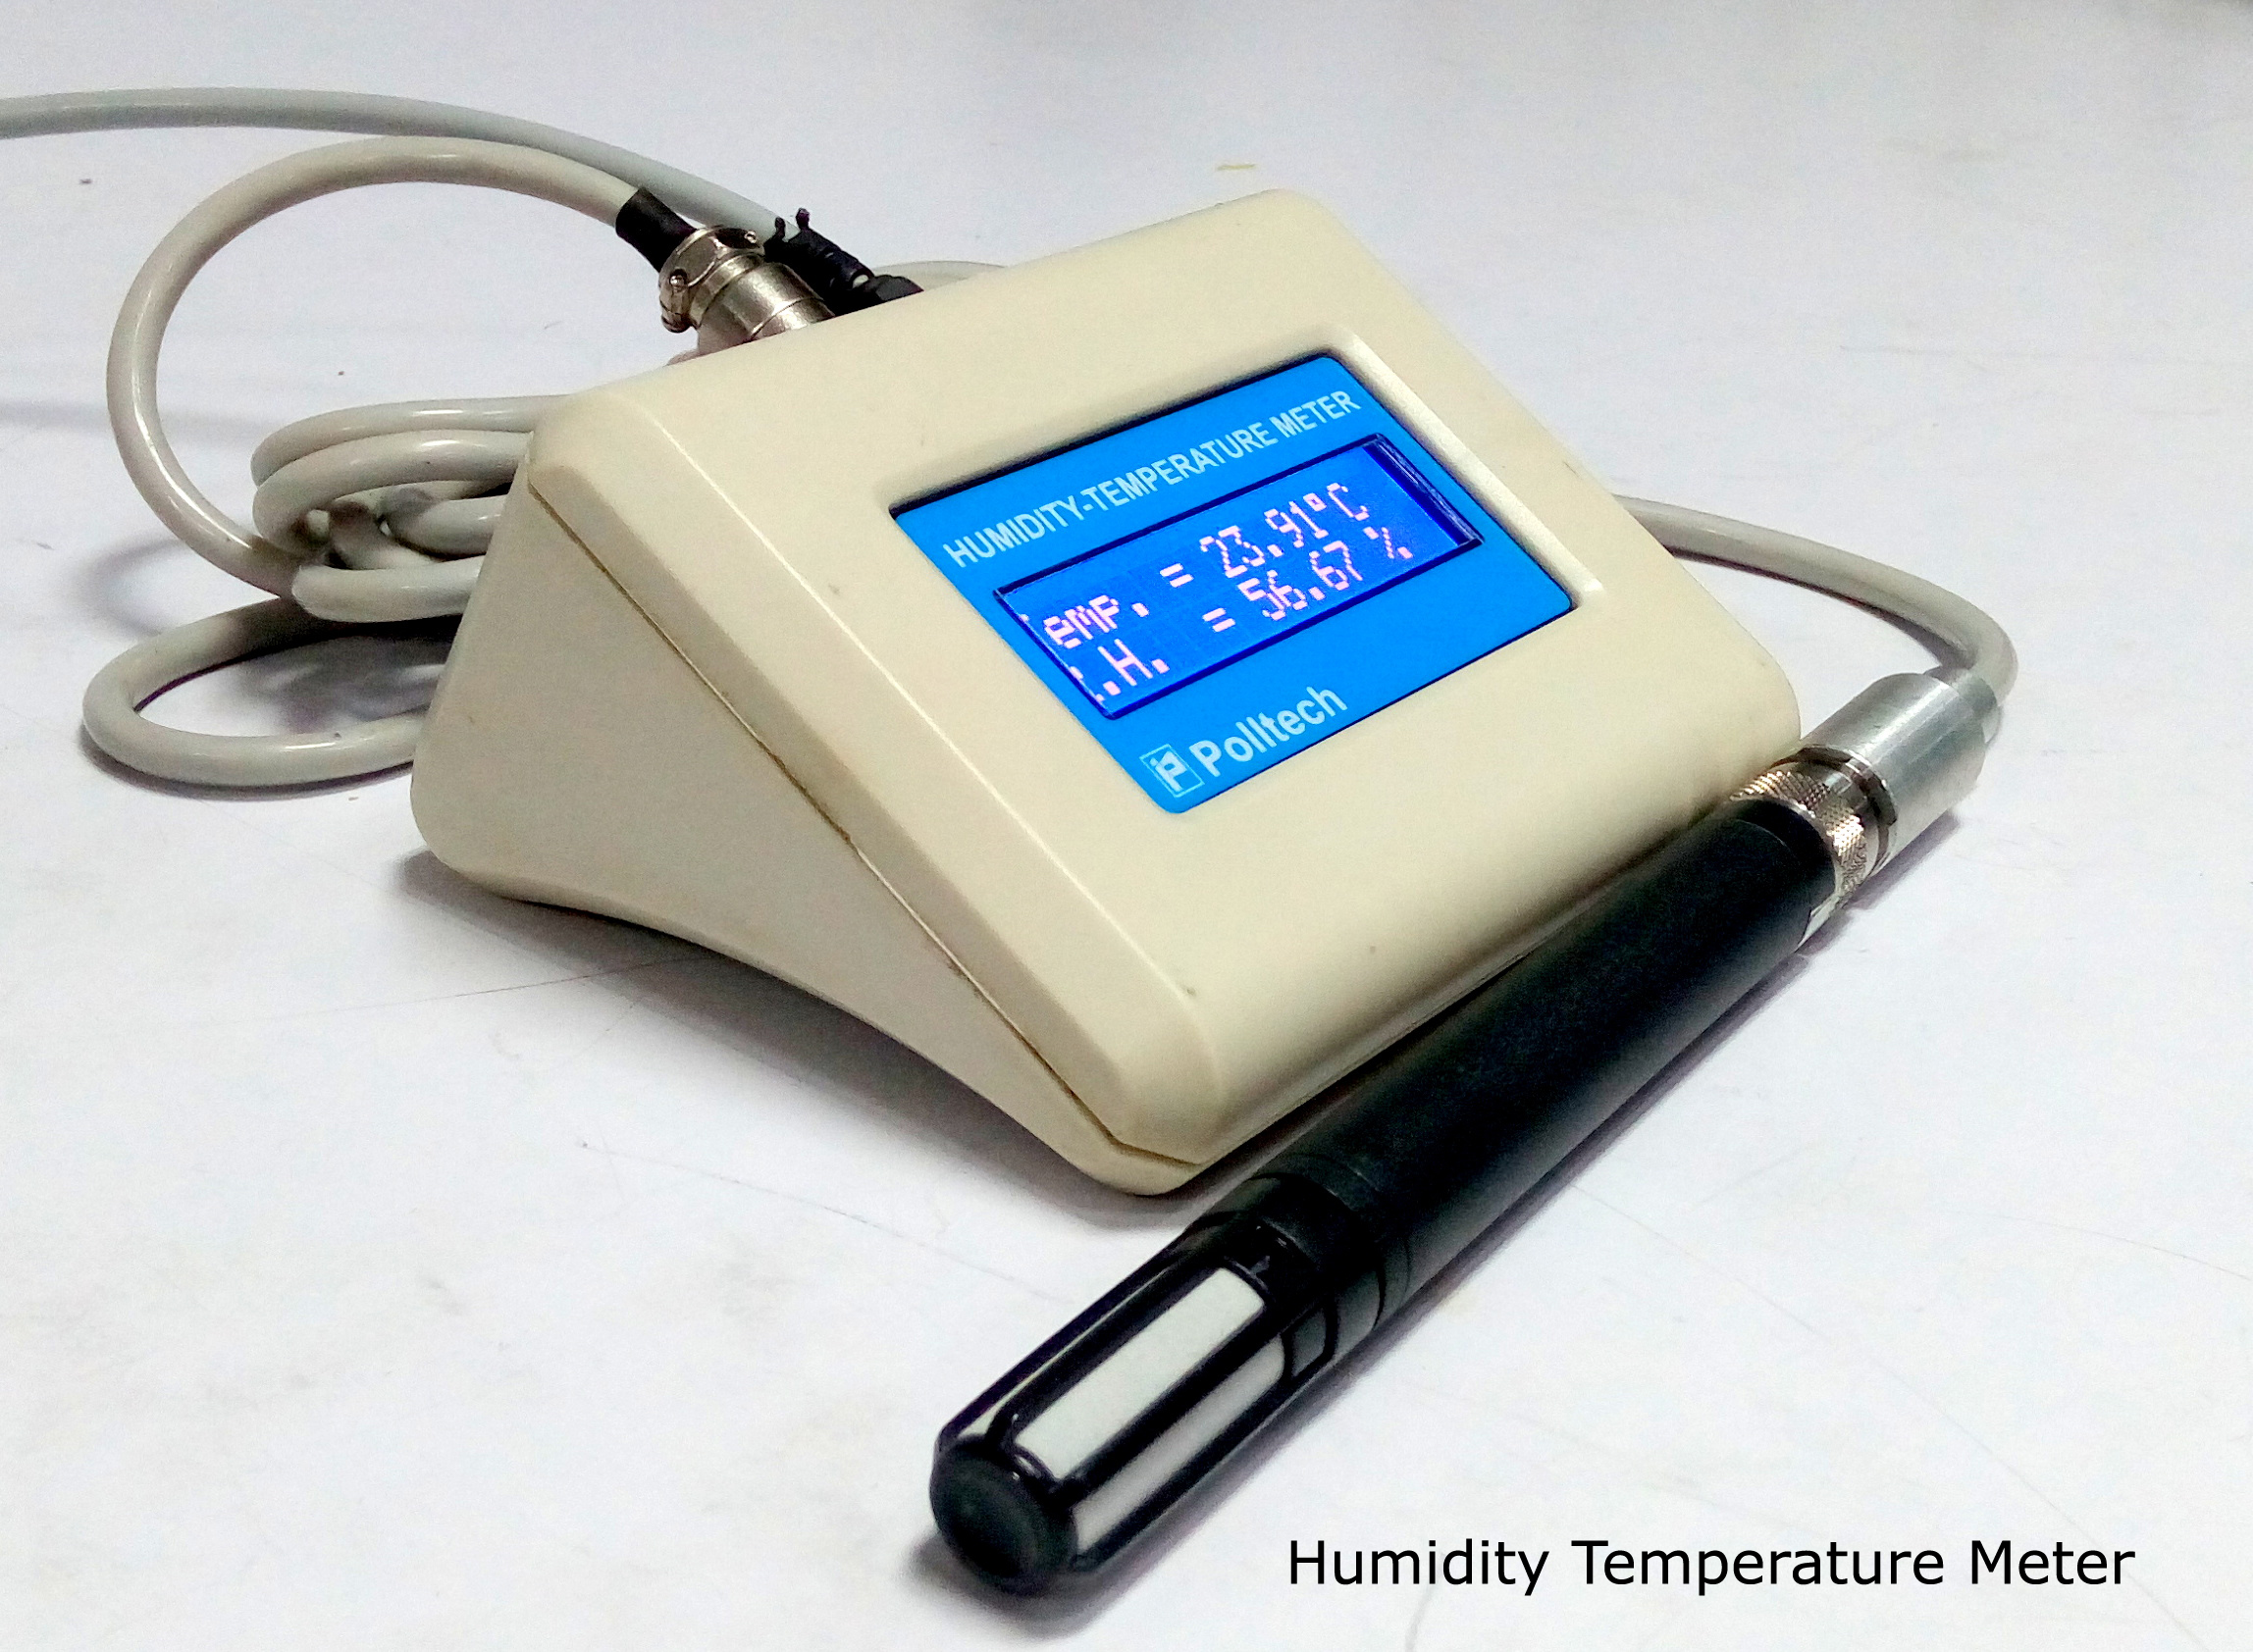 https://polltechinstruments.com/images/products/thm.jpg